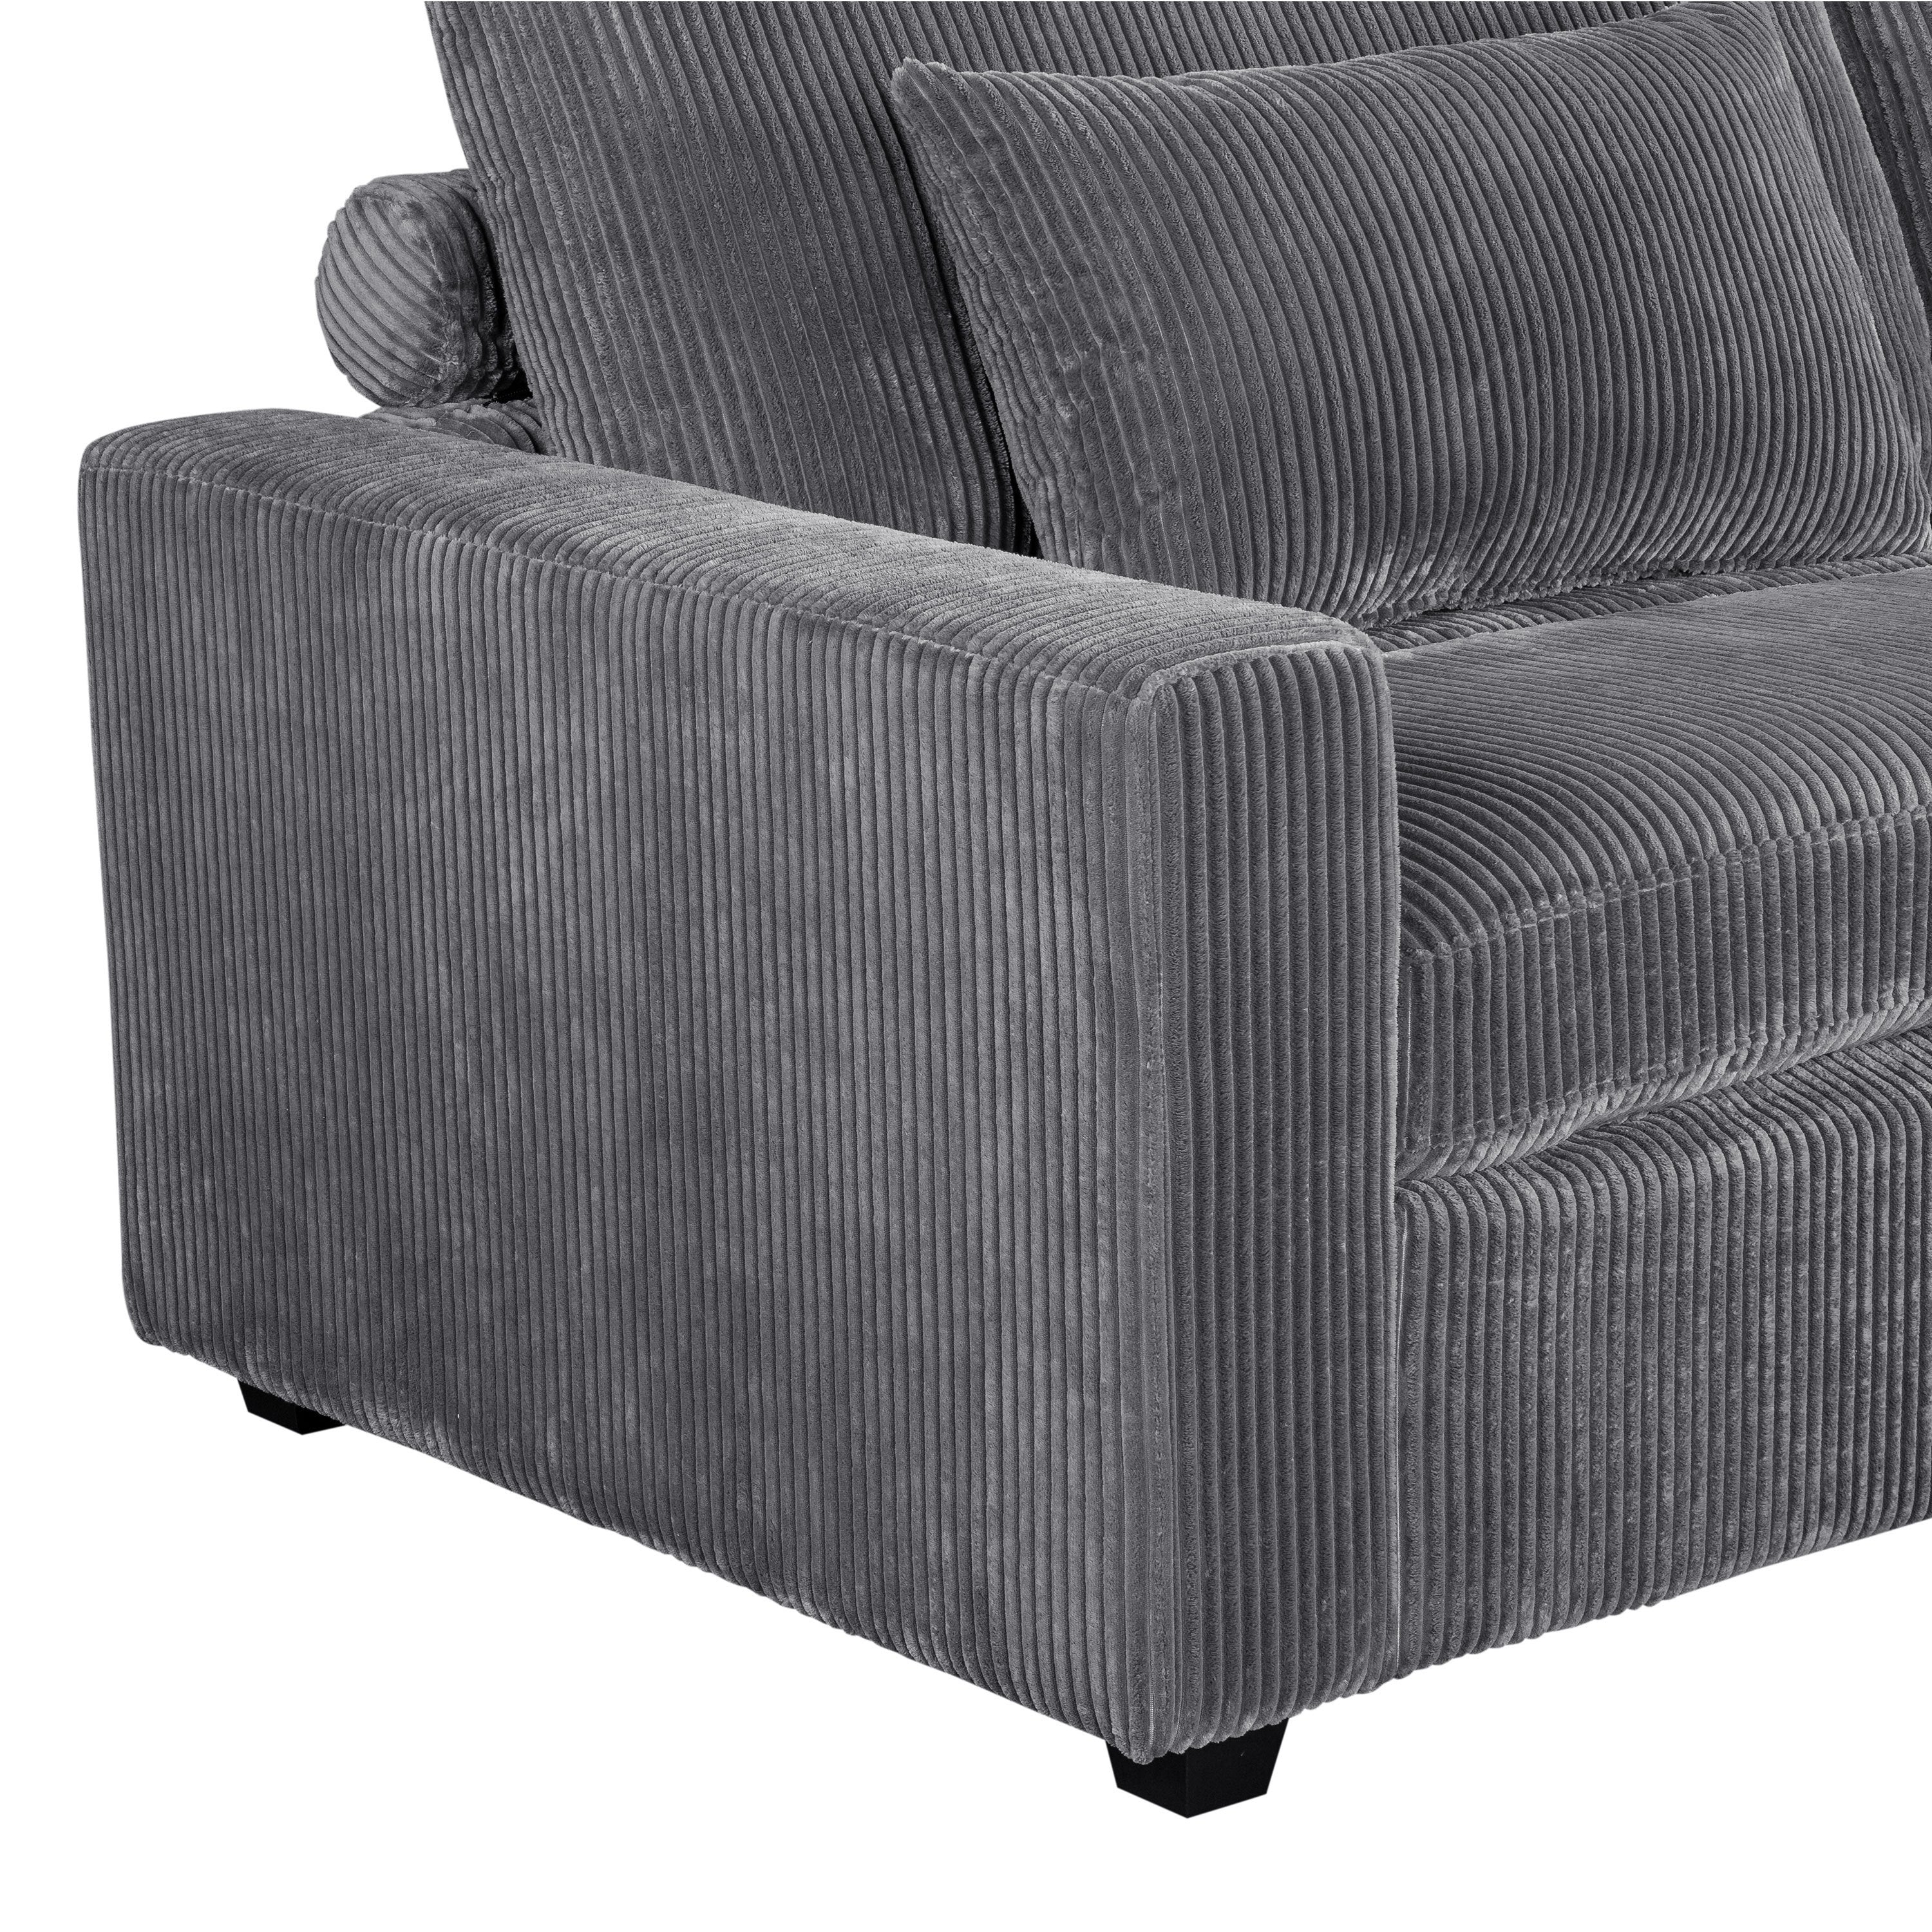 Louie Corduroy Sofa, Deep Sectional Couch with Ottoman - Gray